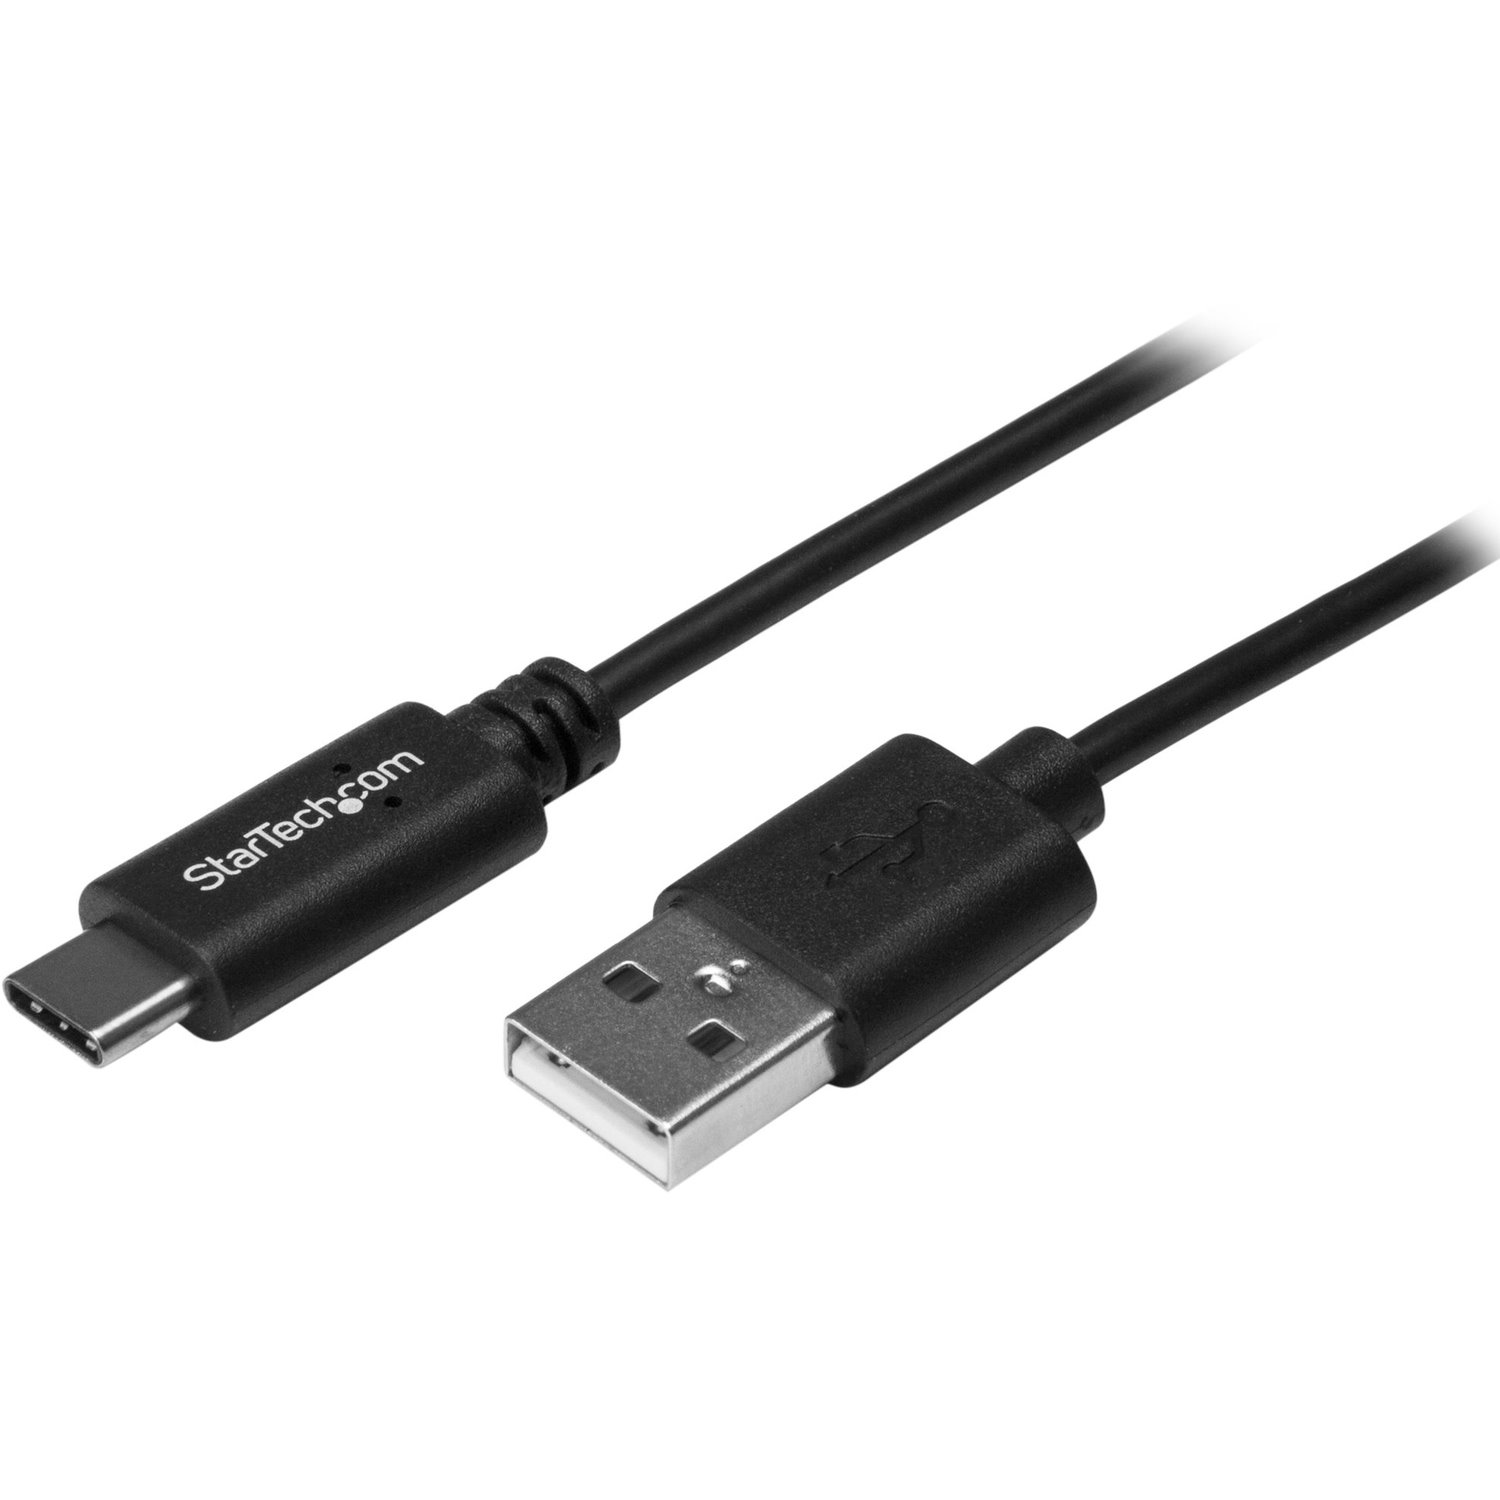 StarTech.com USB C to USB Cable - 2m ( 6 ft.) - USB A to C - USB 2.0 Cable - USB Adapter Cable - USB Type C - USB-C Cable